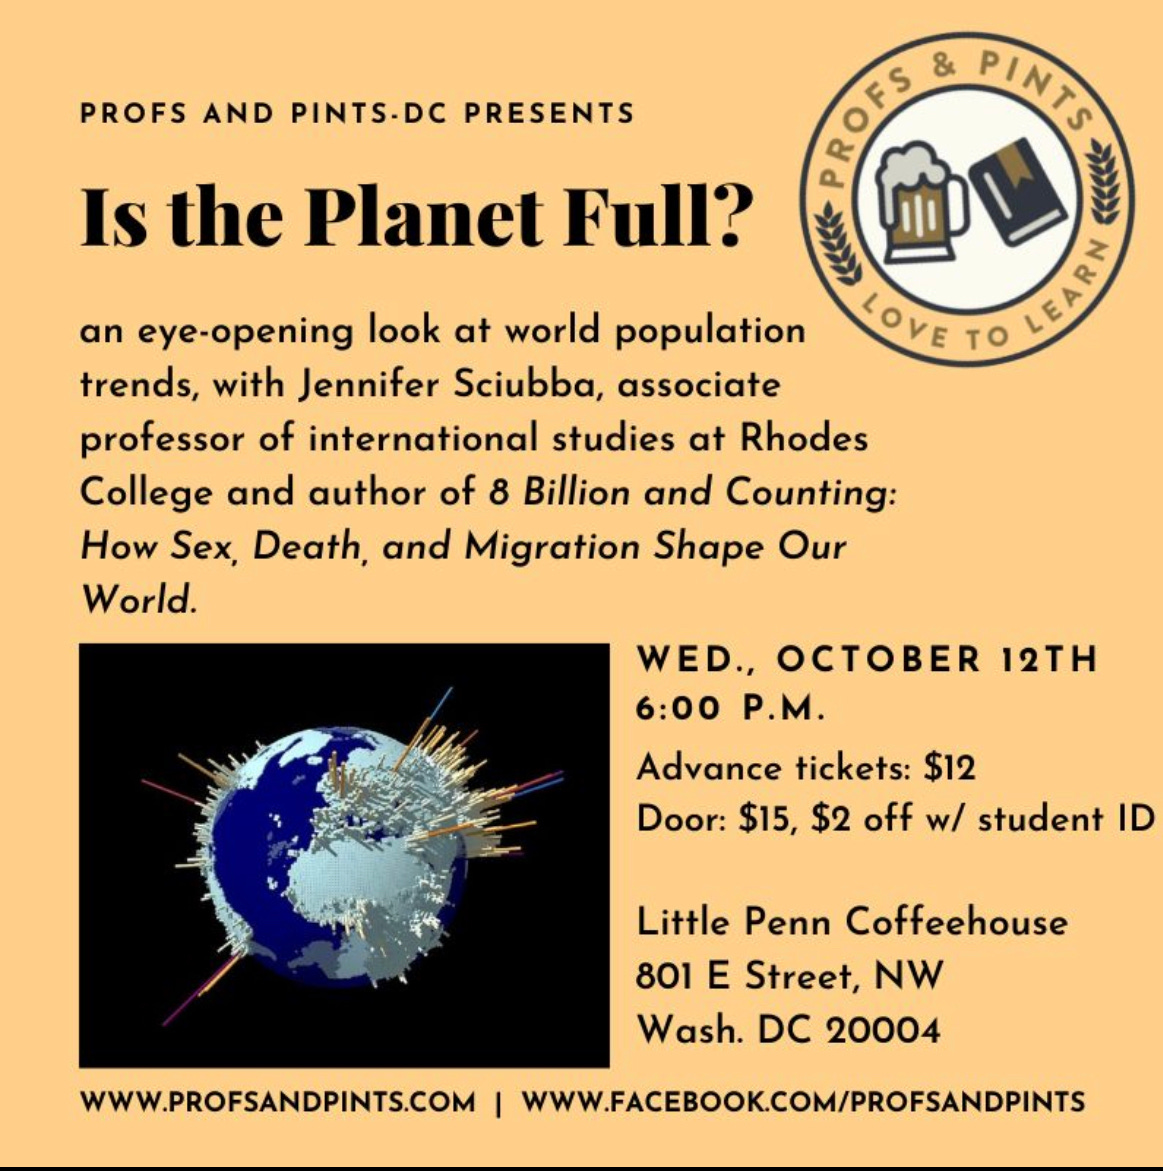 Advertisement for Profs and Pints event Oct 12 in DC